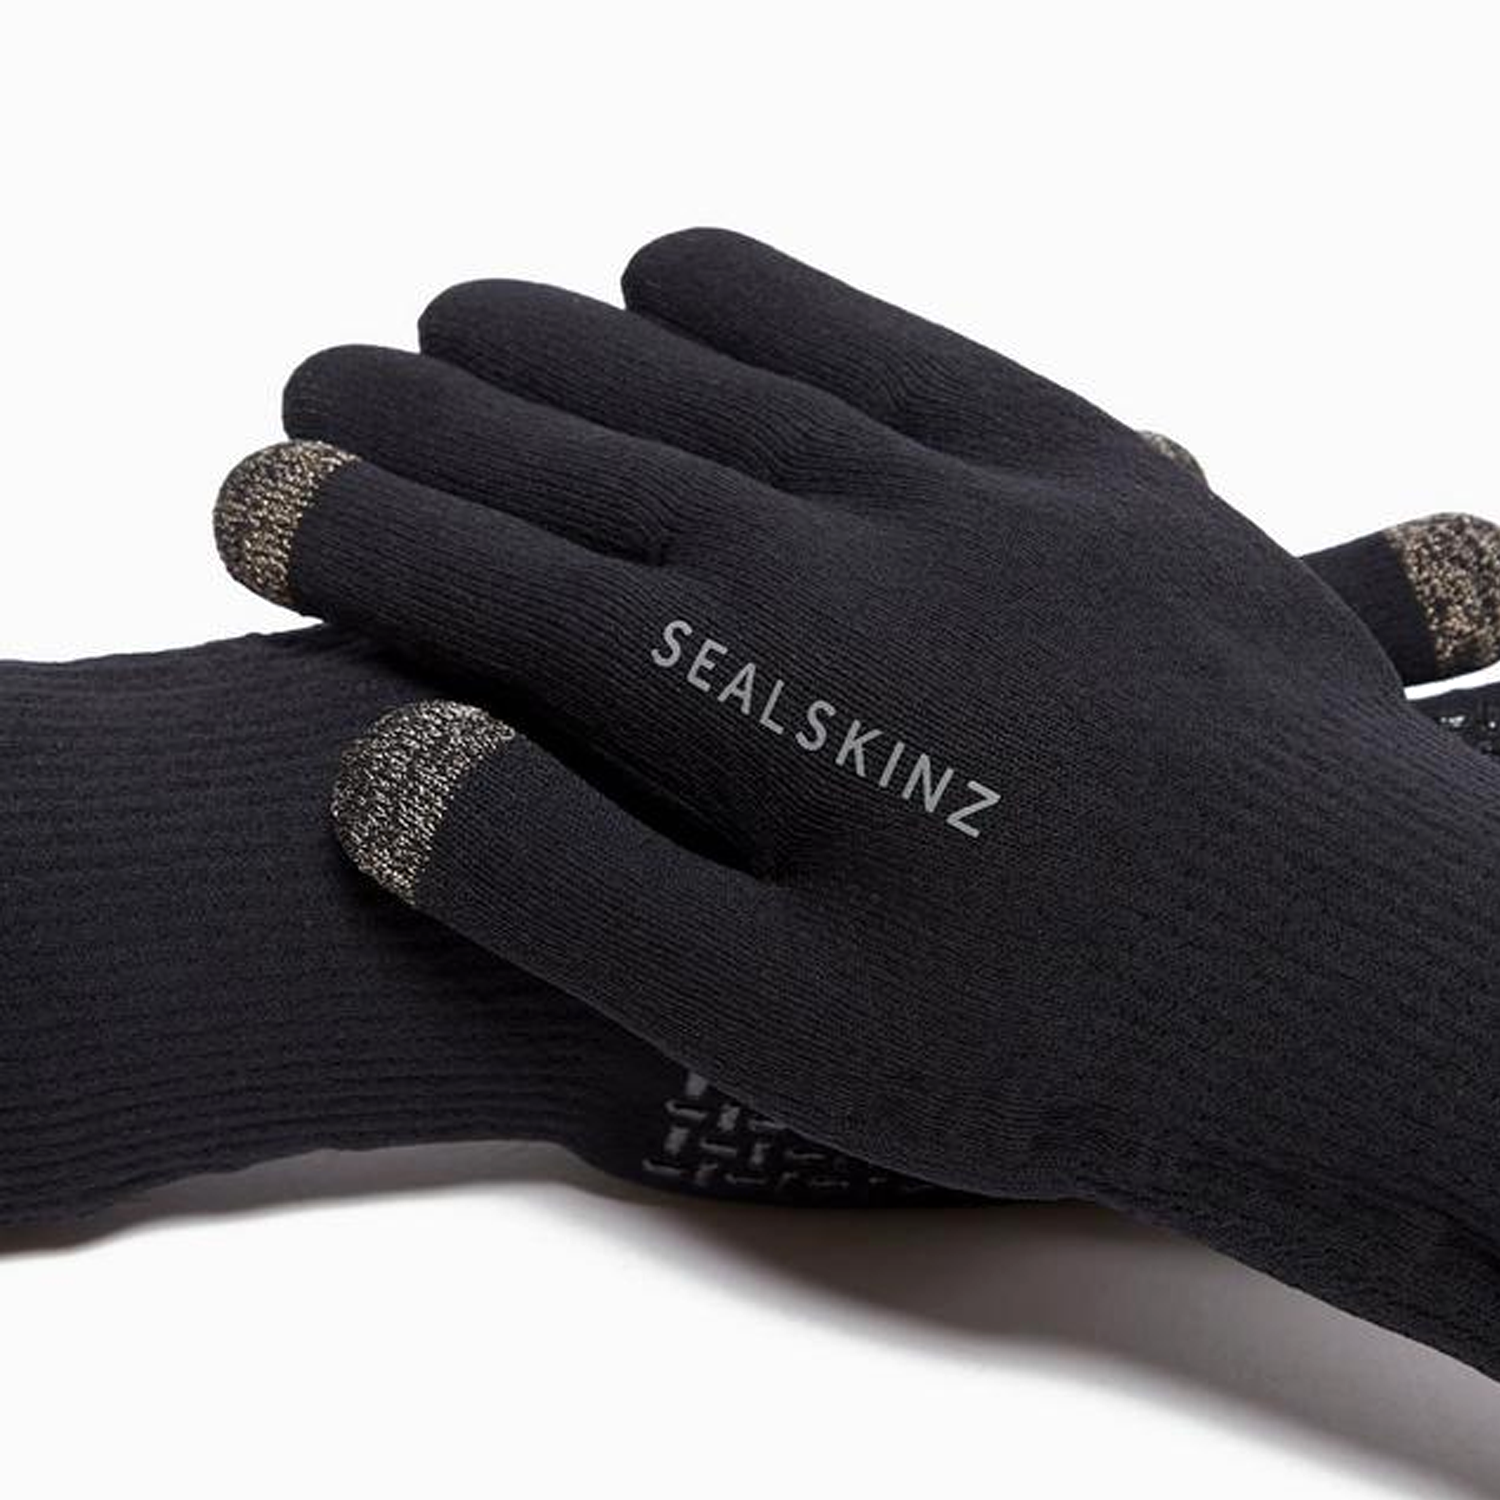 All Weather Ultra Grip Gloves Black